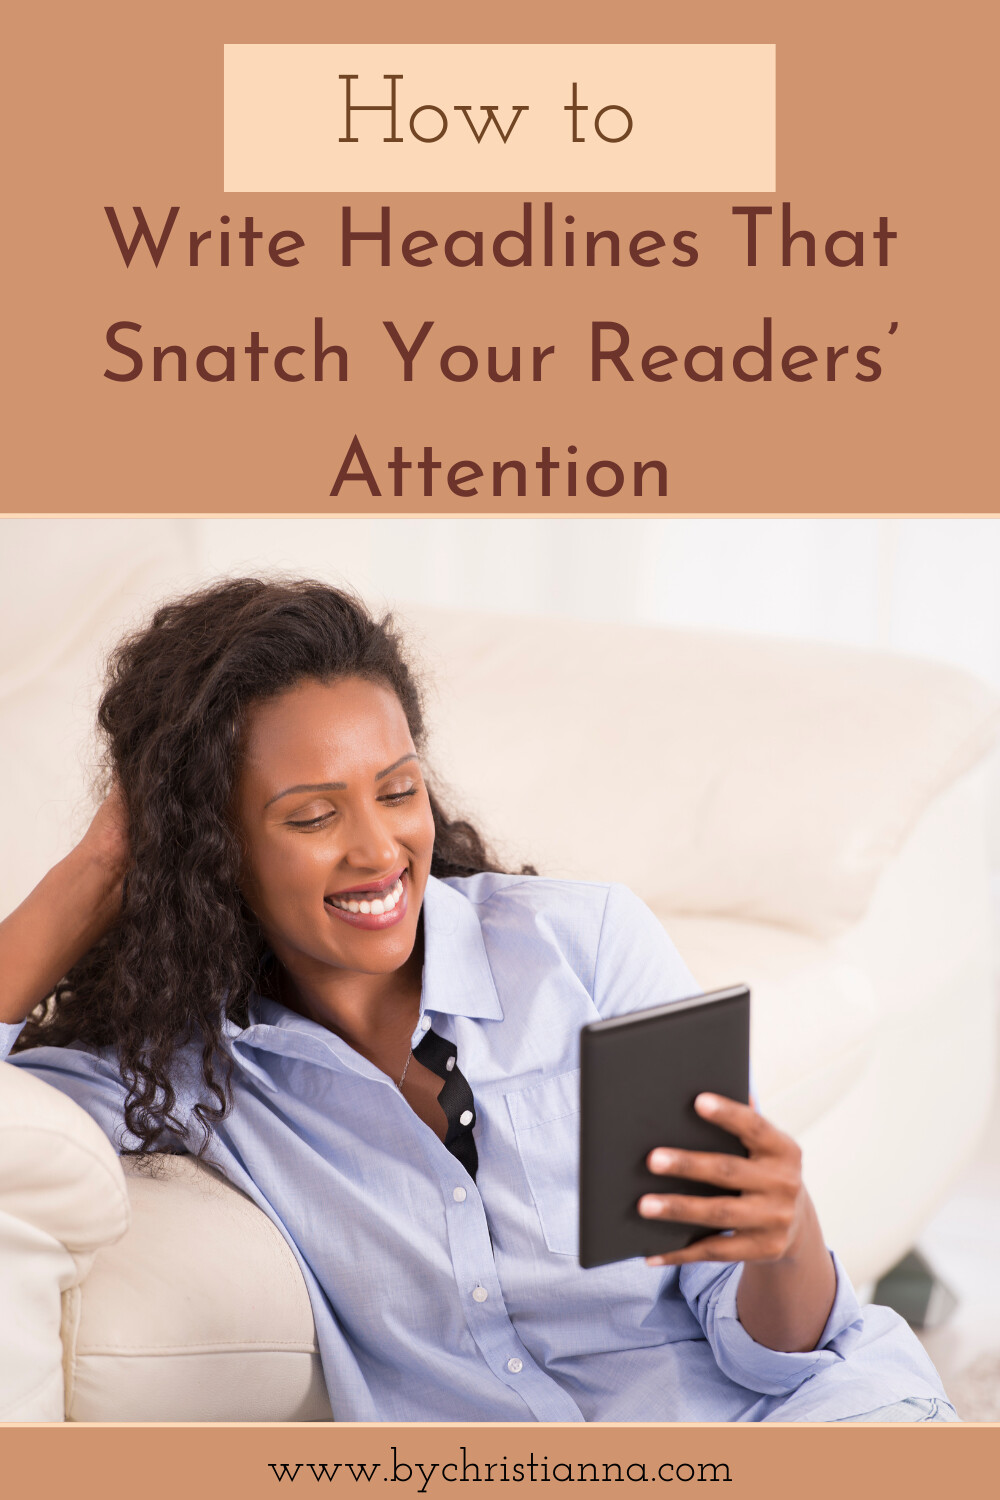 How to Write Headlines That Snatch Your Readers’ Attention